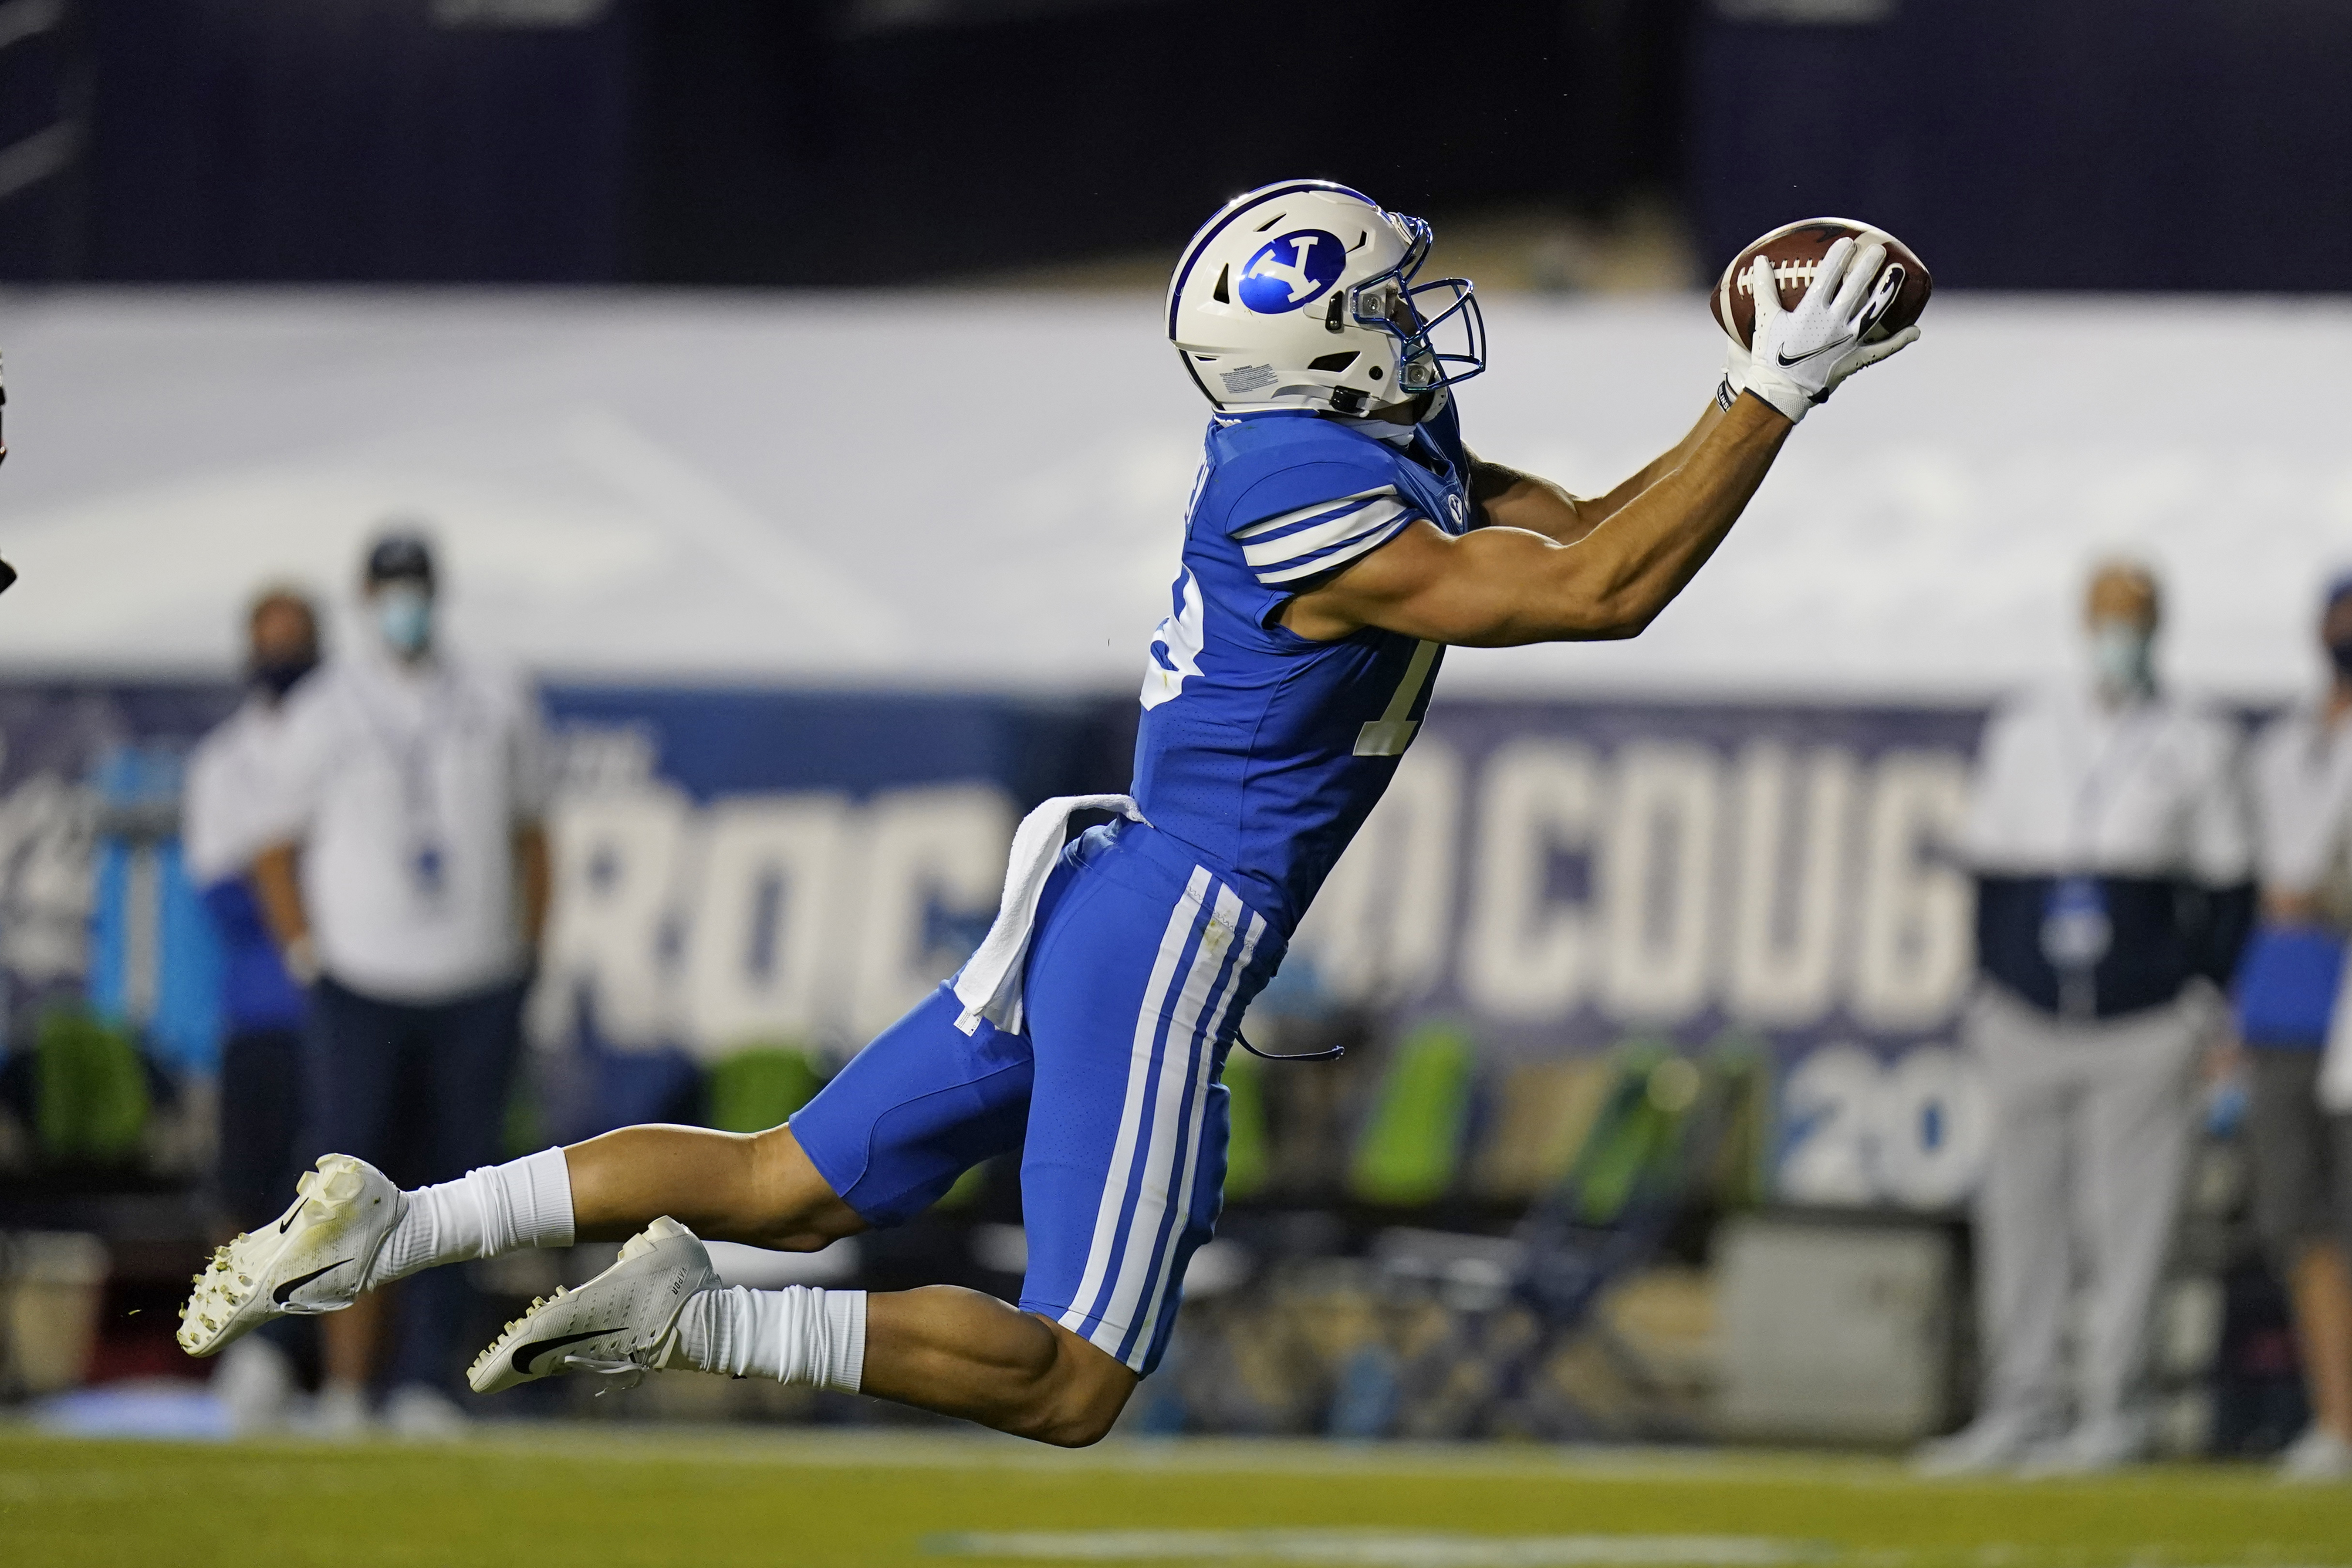 BYU wide receiver Gunner Romney makes a catch against Troy in 2020.